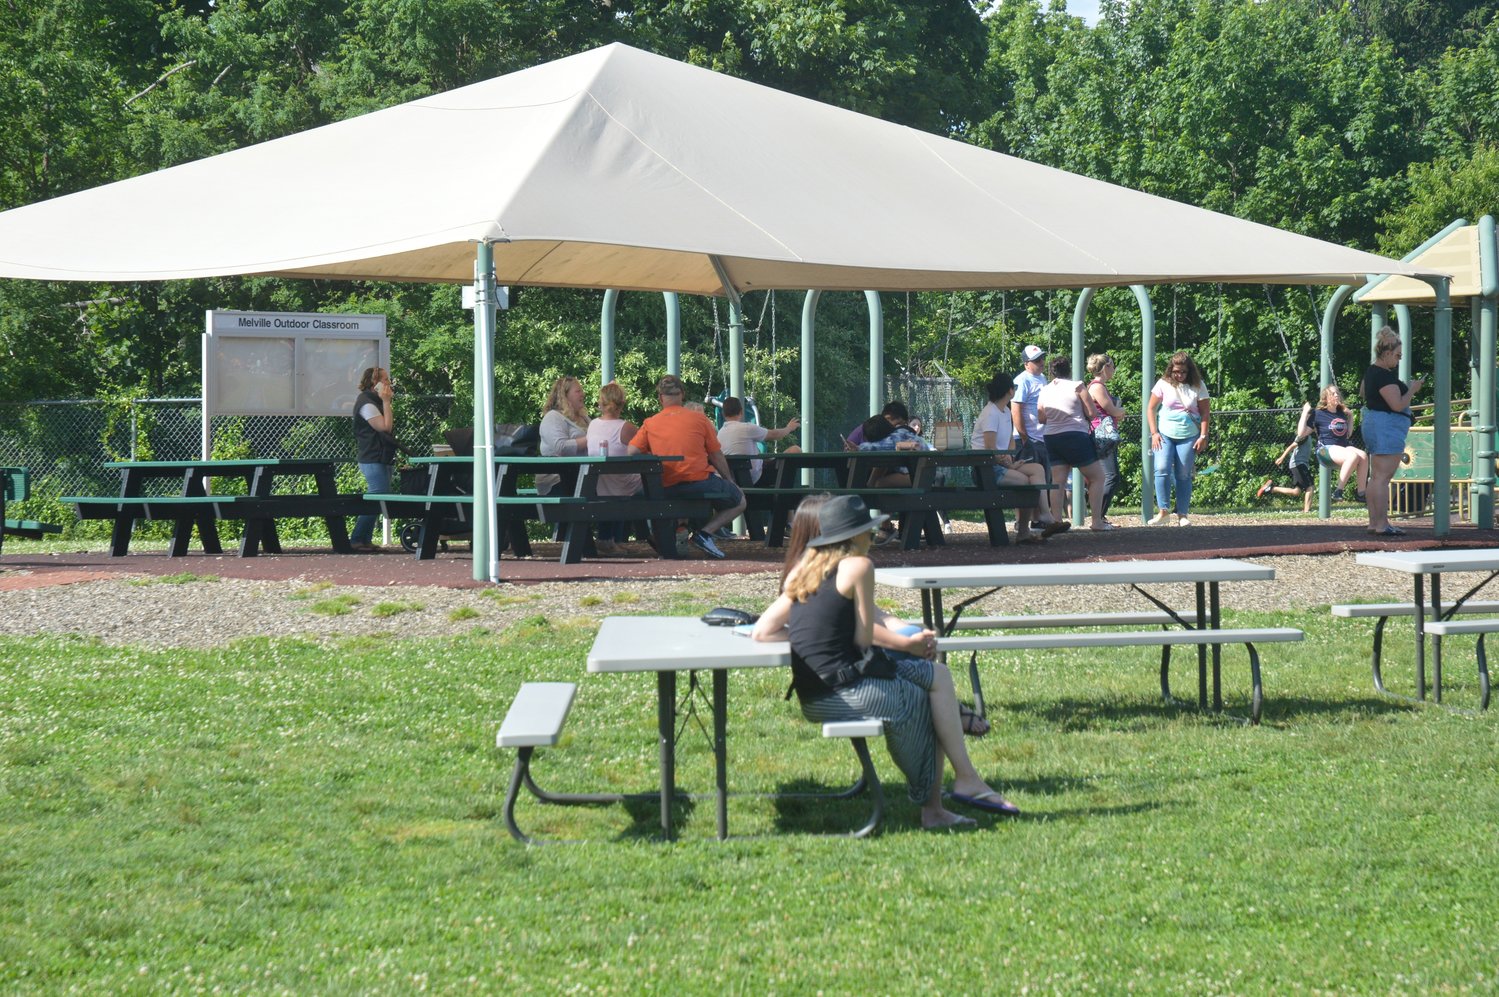 The Outdoor Learning Activity Zone at Melville School includes a separate tented area near the playground.